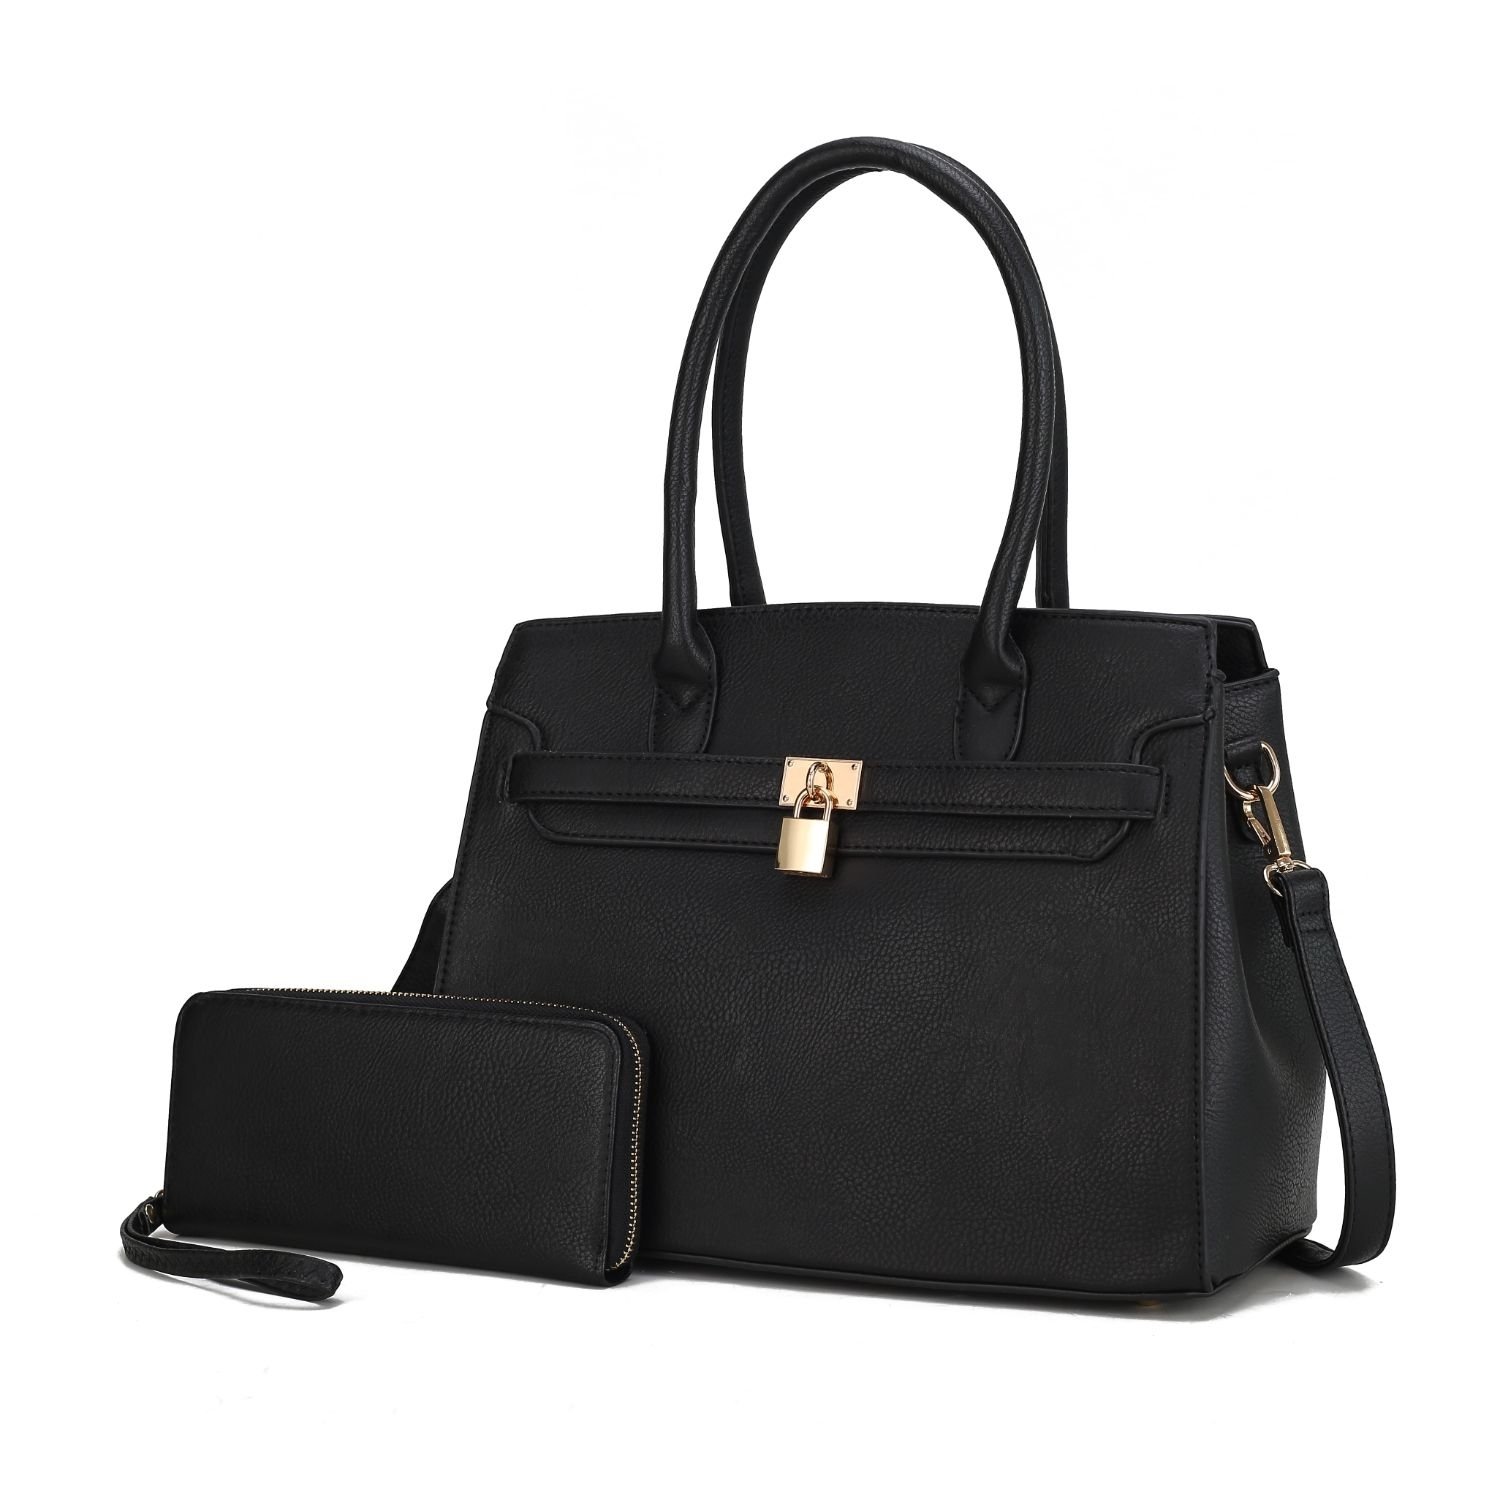 MKF Collection Bruna Satchel Handbag With A Matching Wallet By Mia K -2 Pieces Set - Black